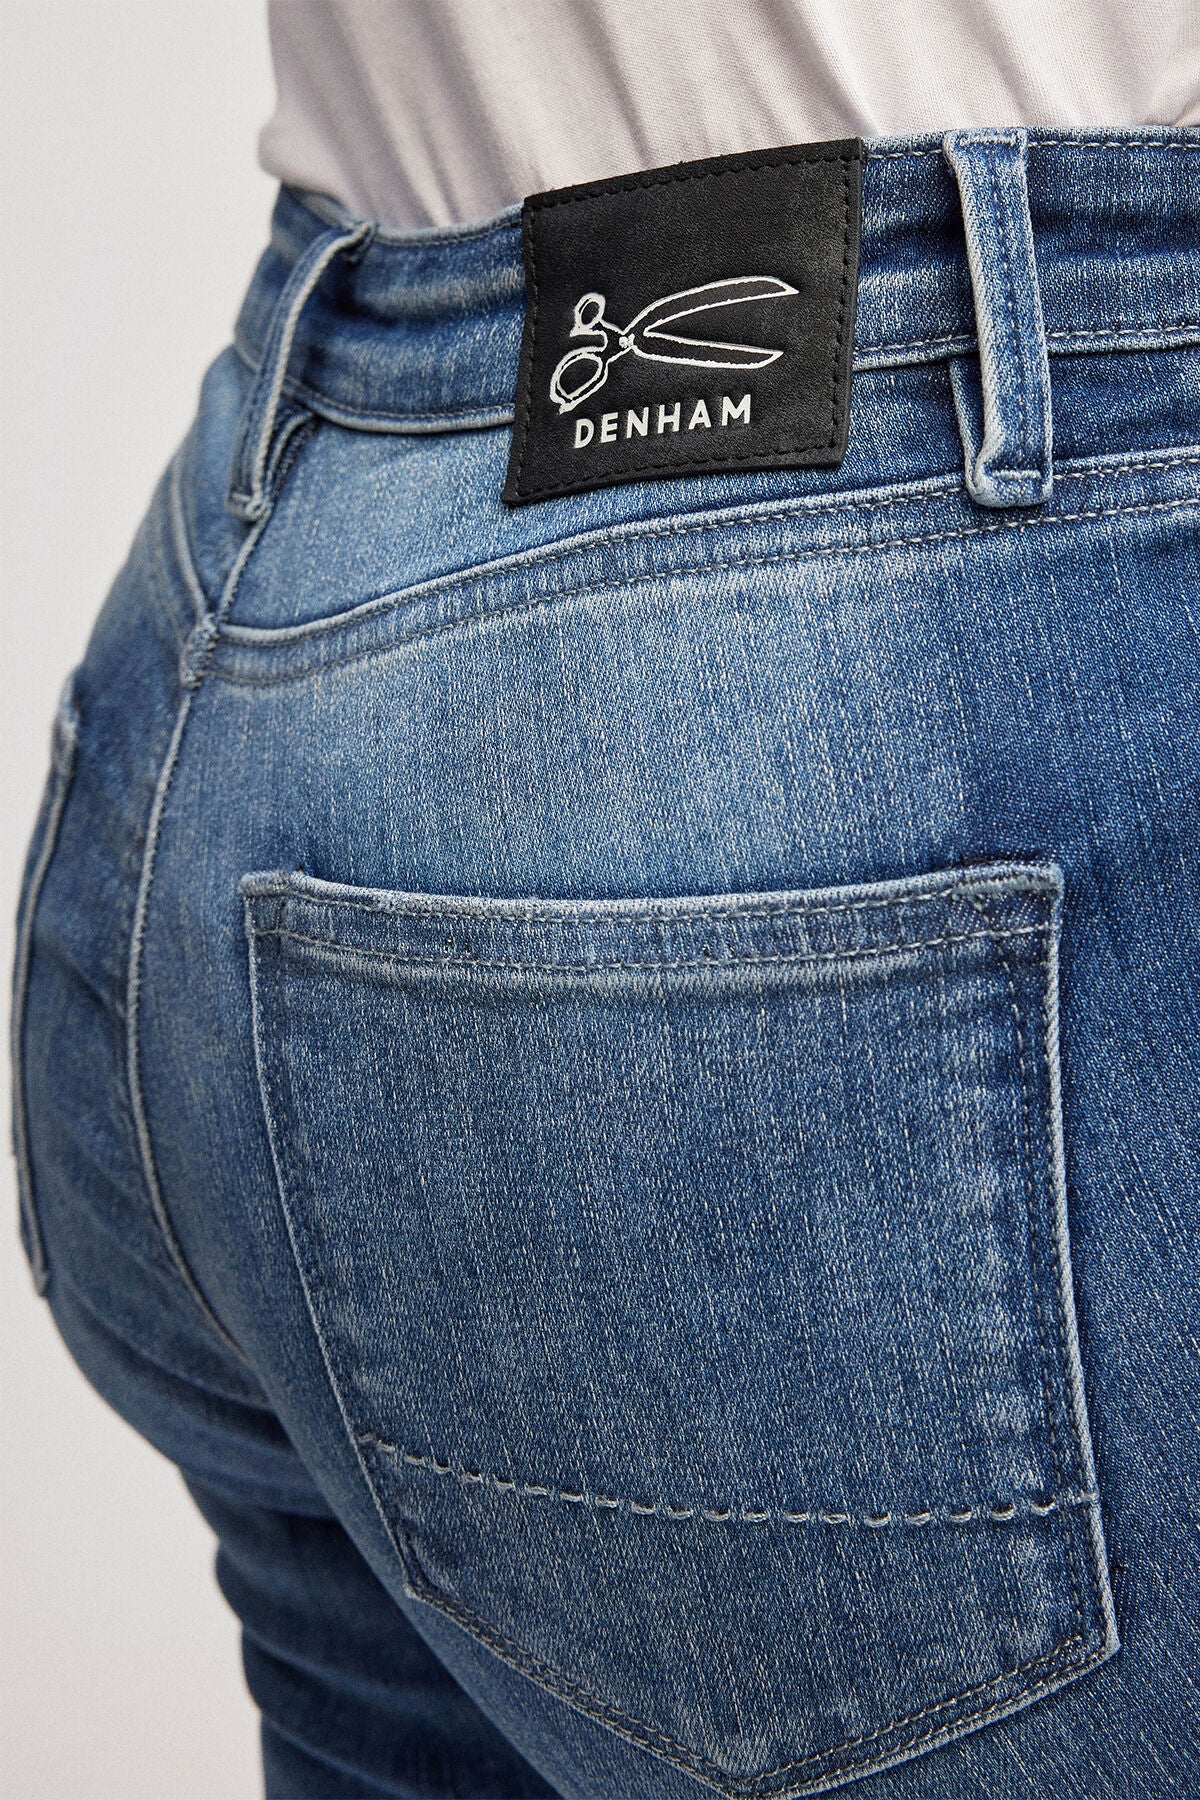 A Denham high-rise woman's jeans with the NEEDLE Skinny - Light Indigo label on the back.